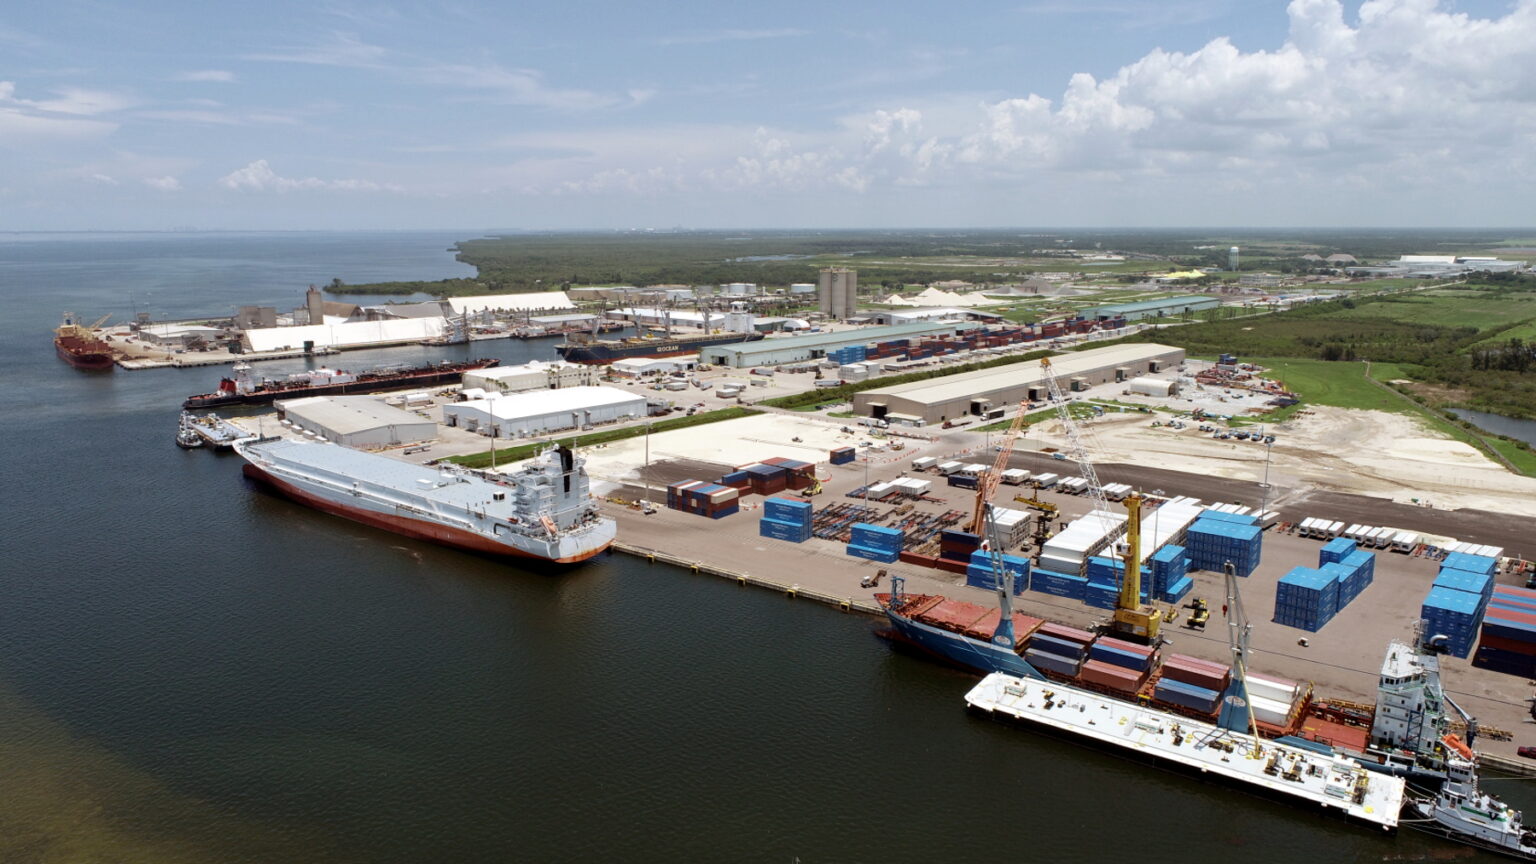 Port Manatee welcomes facility acquisition by Aceros Arequipa unit. Image: Port Manatee